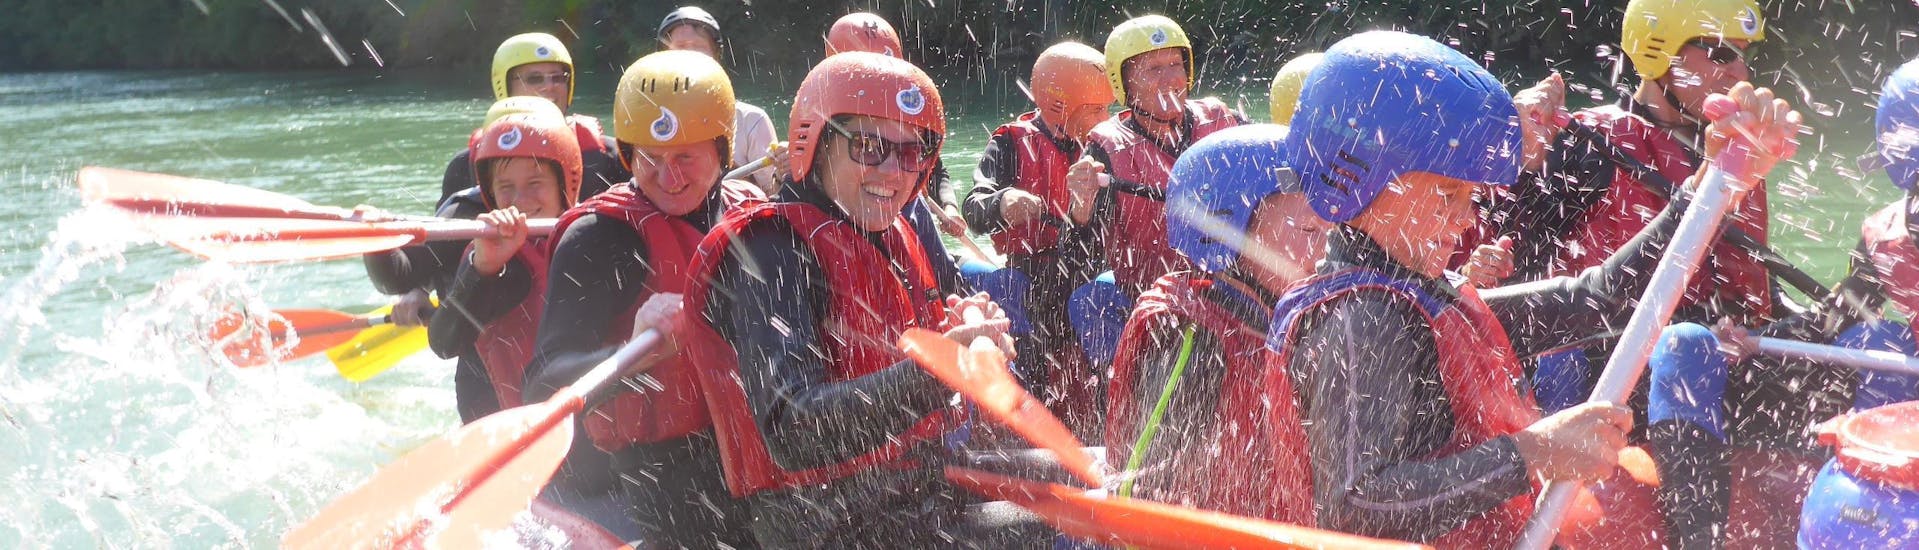 Splashing water during rafting on the Iller in Allgäu - all in one boat with Spirits of Nature Allgäu.